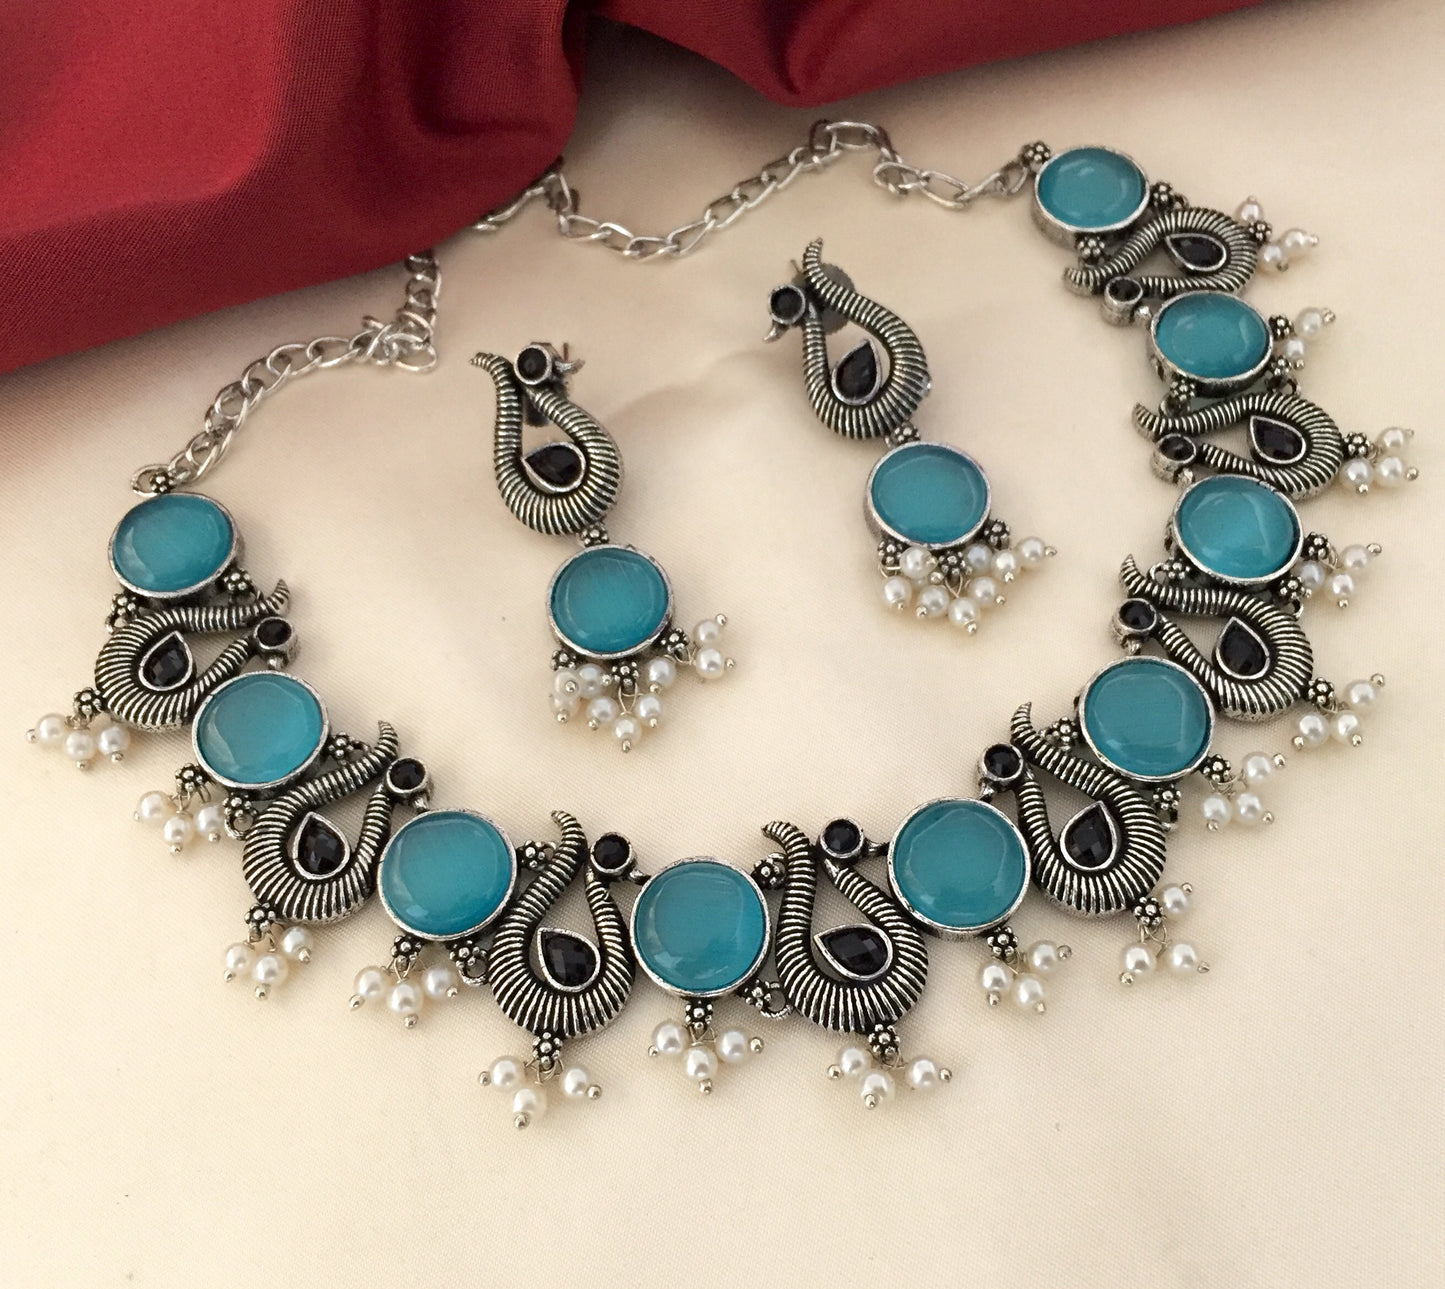 Blue monalisa stone necklace with earrings